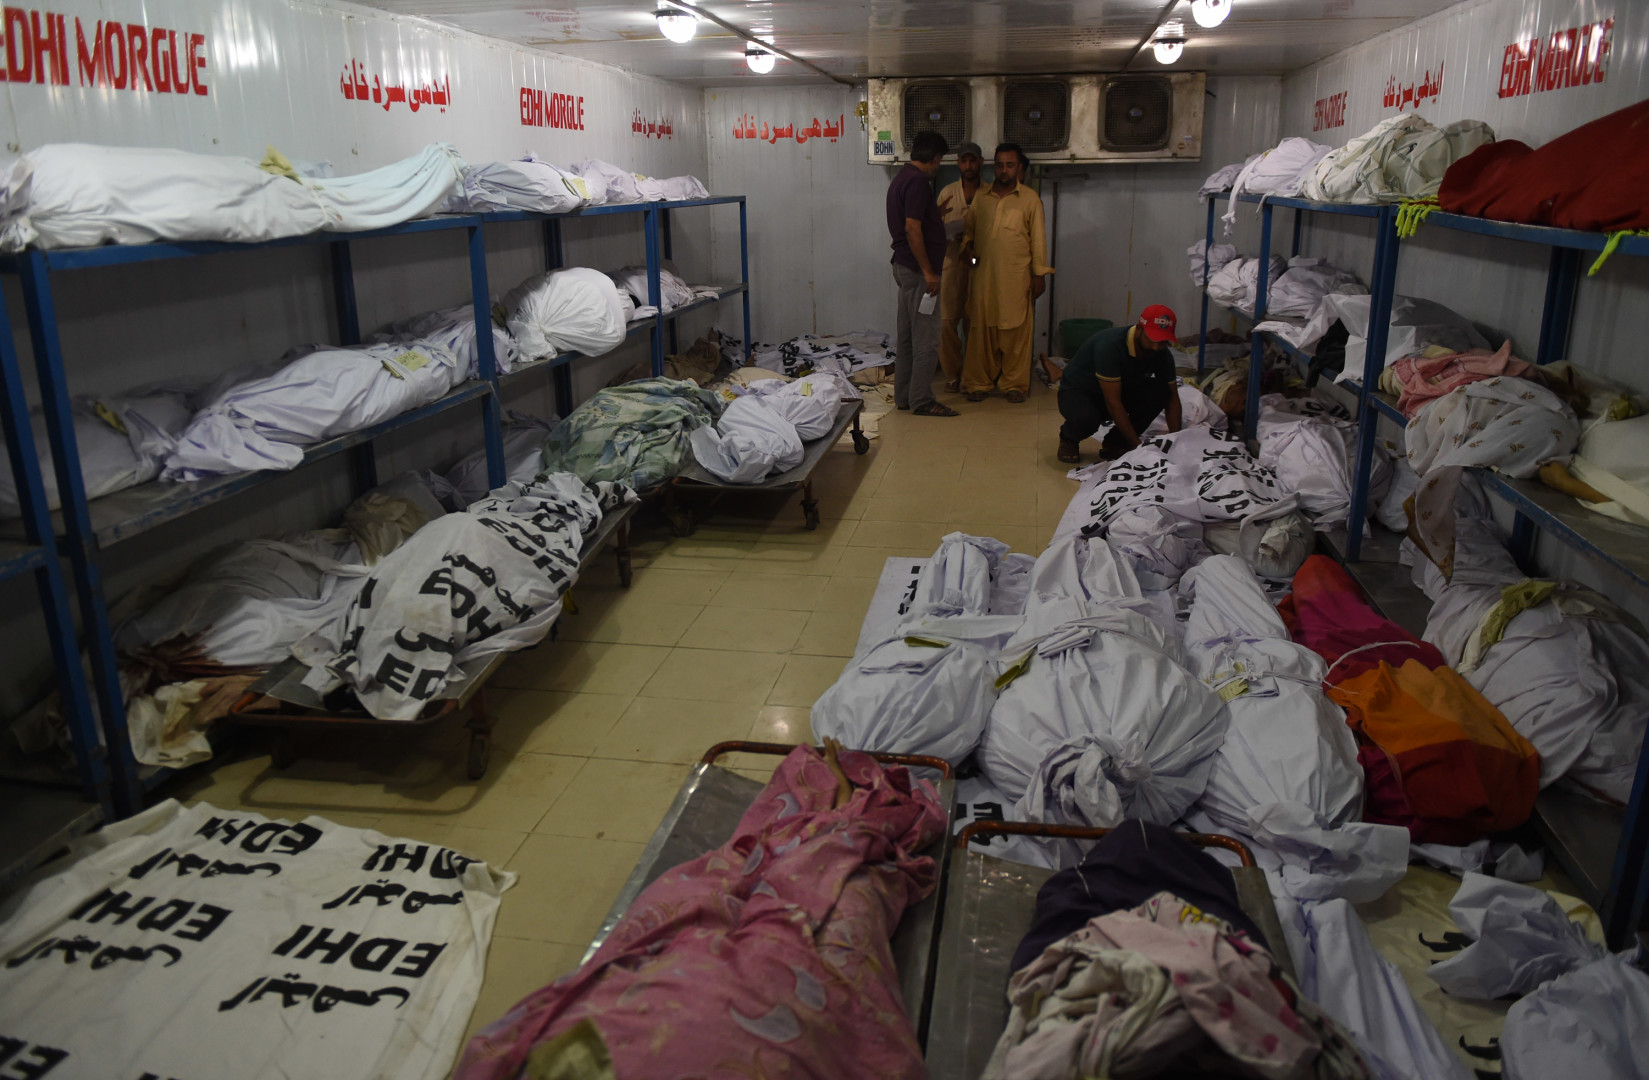 Relatives of heatwave victims stand as dead bodies are seen in the the cold storage of the EDHI morgue in Karachi on June 21, 2015. A heatwave has killed at least 45 people in Pakistan's largest city of Karachi, officials said June 21, as residents grapple with frequent power outages and water scarcity during the Muslim fasting month of Ramadan. (AFP PHOTO / ASIF HASSAN)